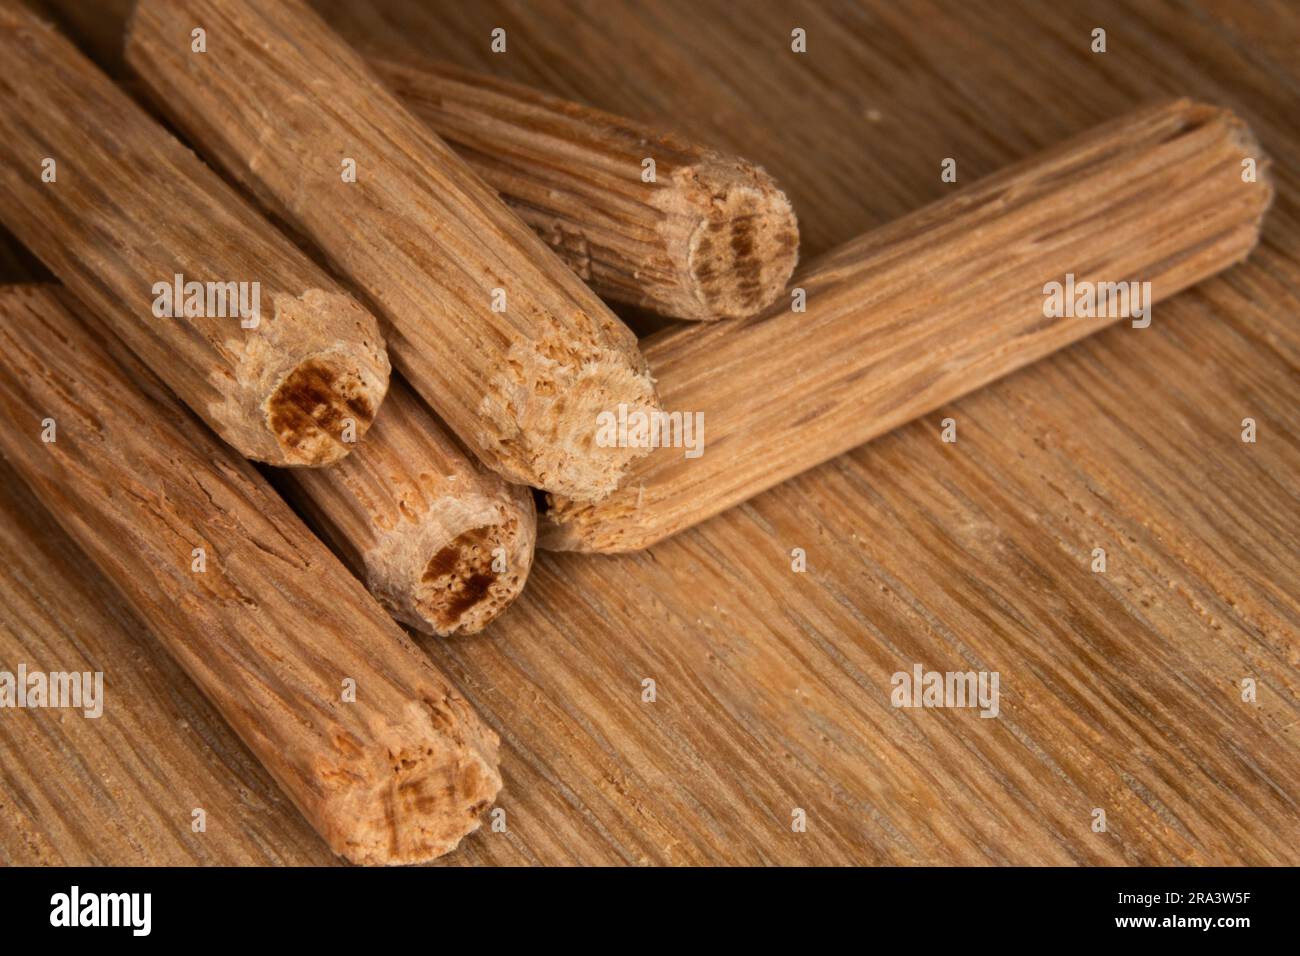 pile of oak dowel pins on oak  background, dowel pins used to join two pieces of wood, joint, joinery Stock Photo